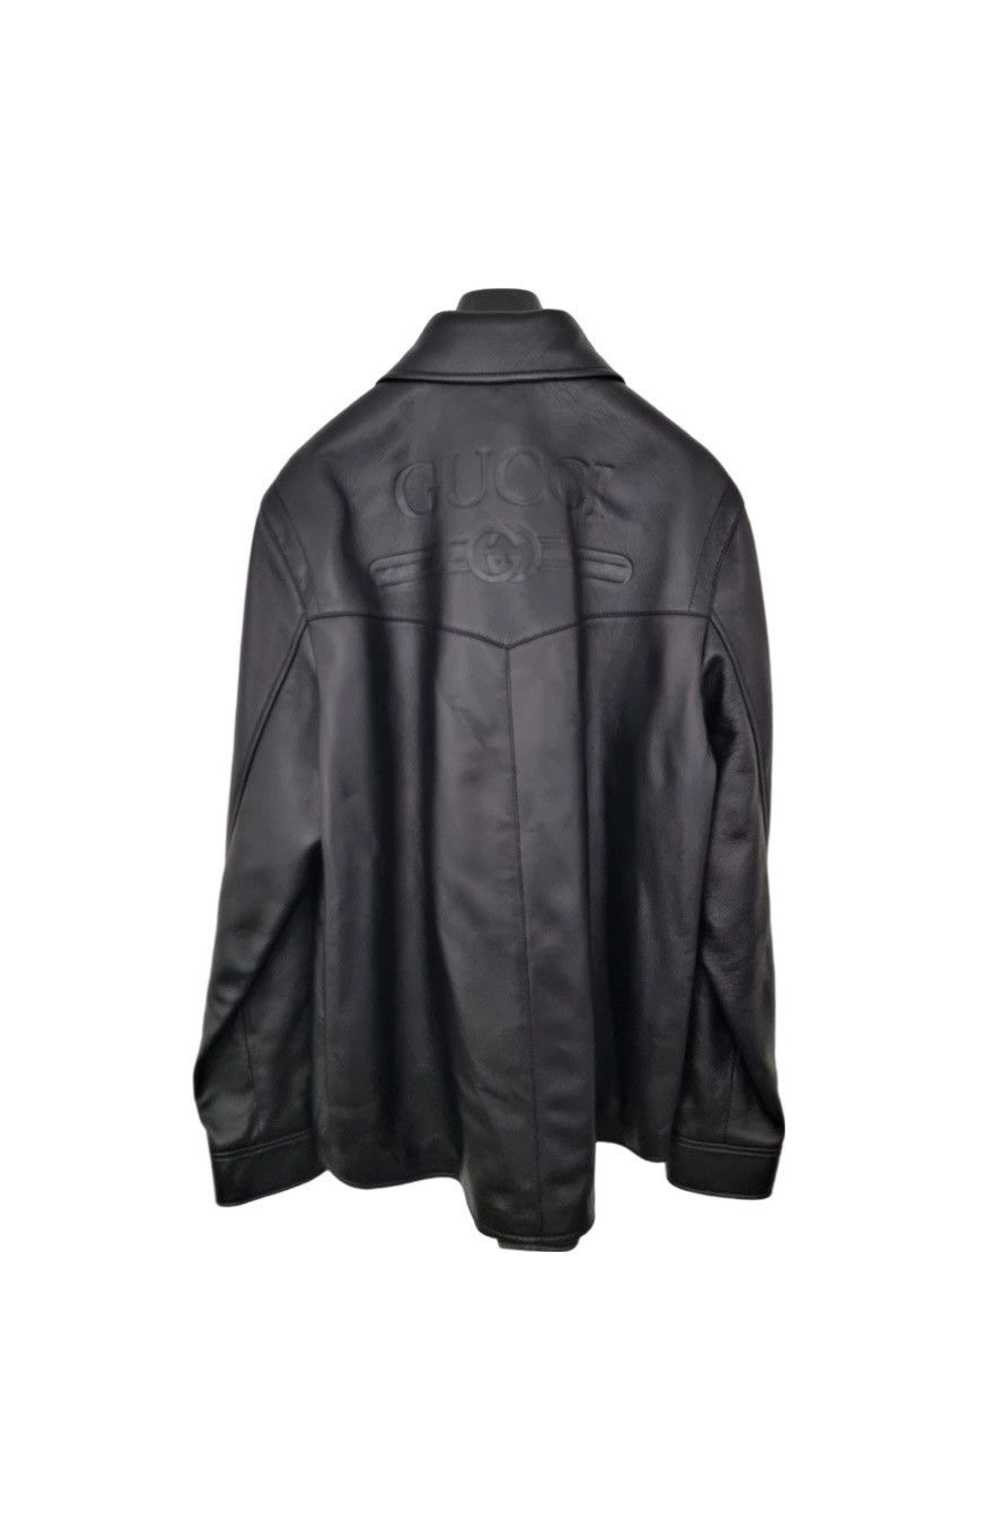 Gucci Gucci Leather Logo Jacket $3500 retail - image 2